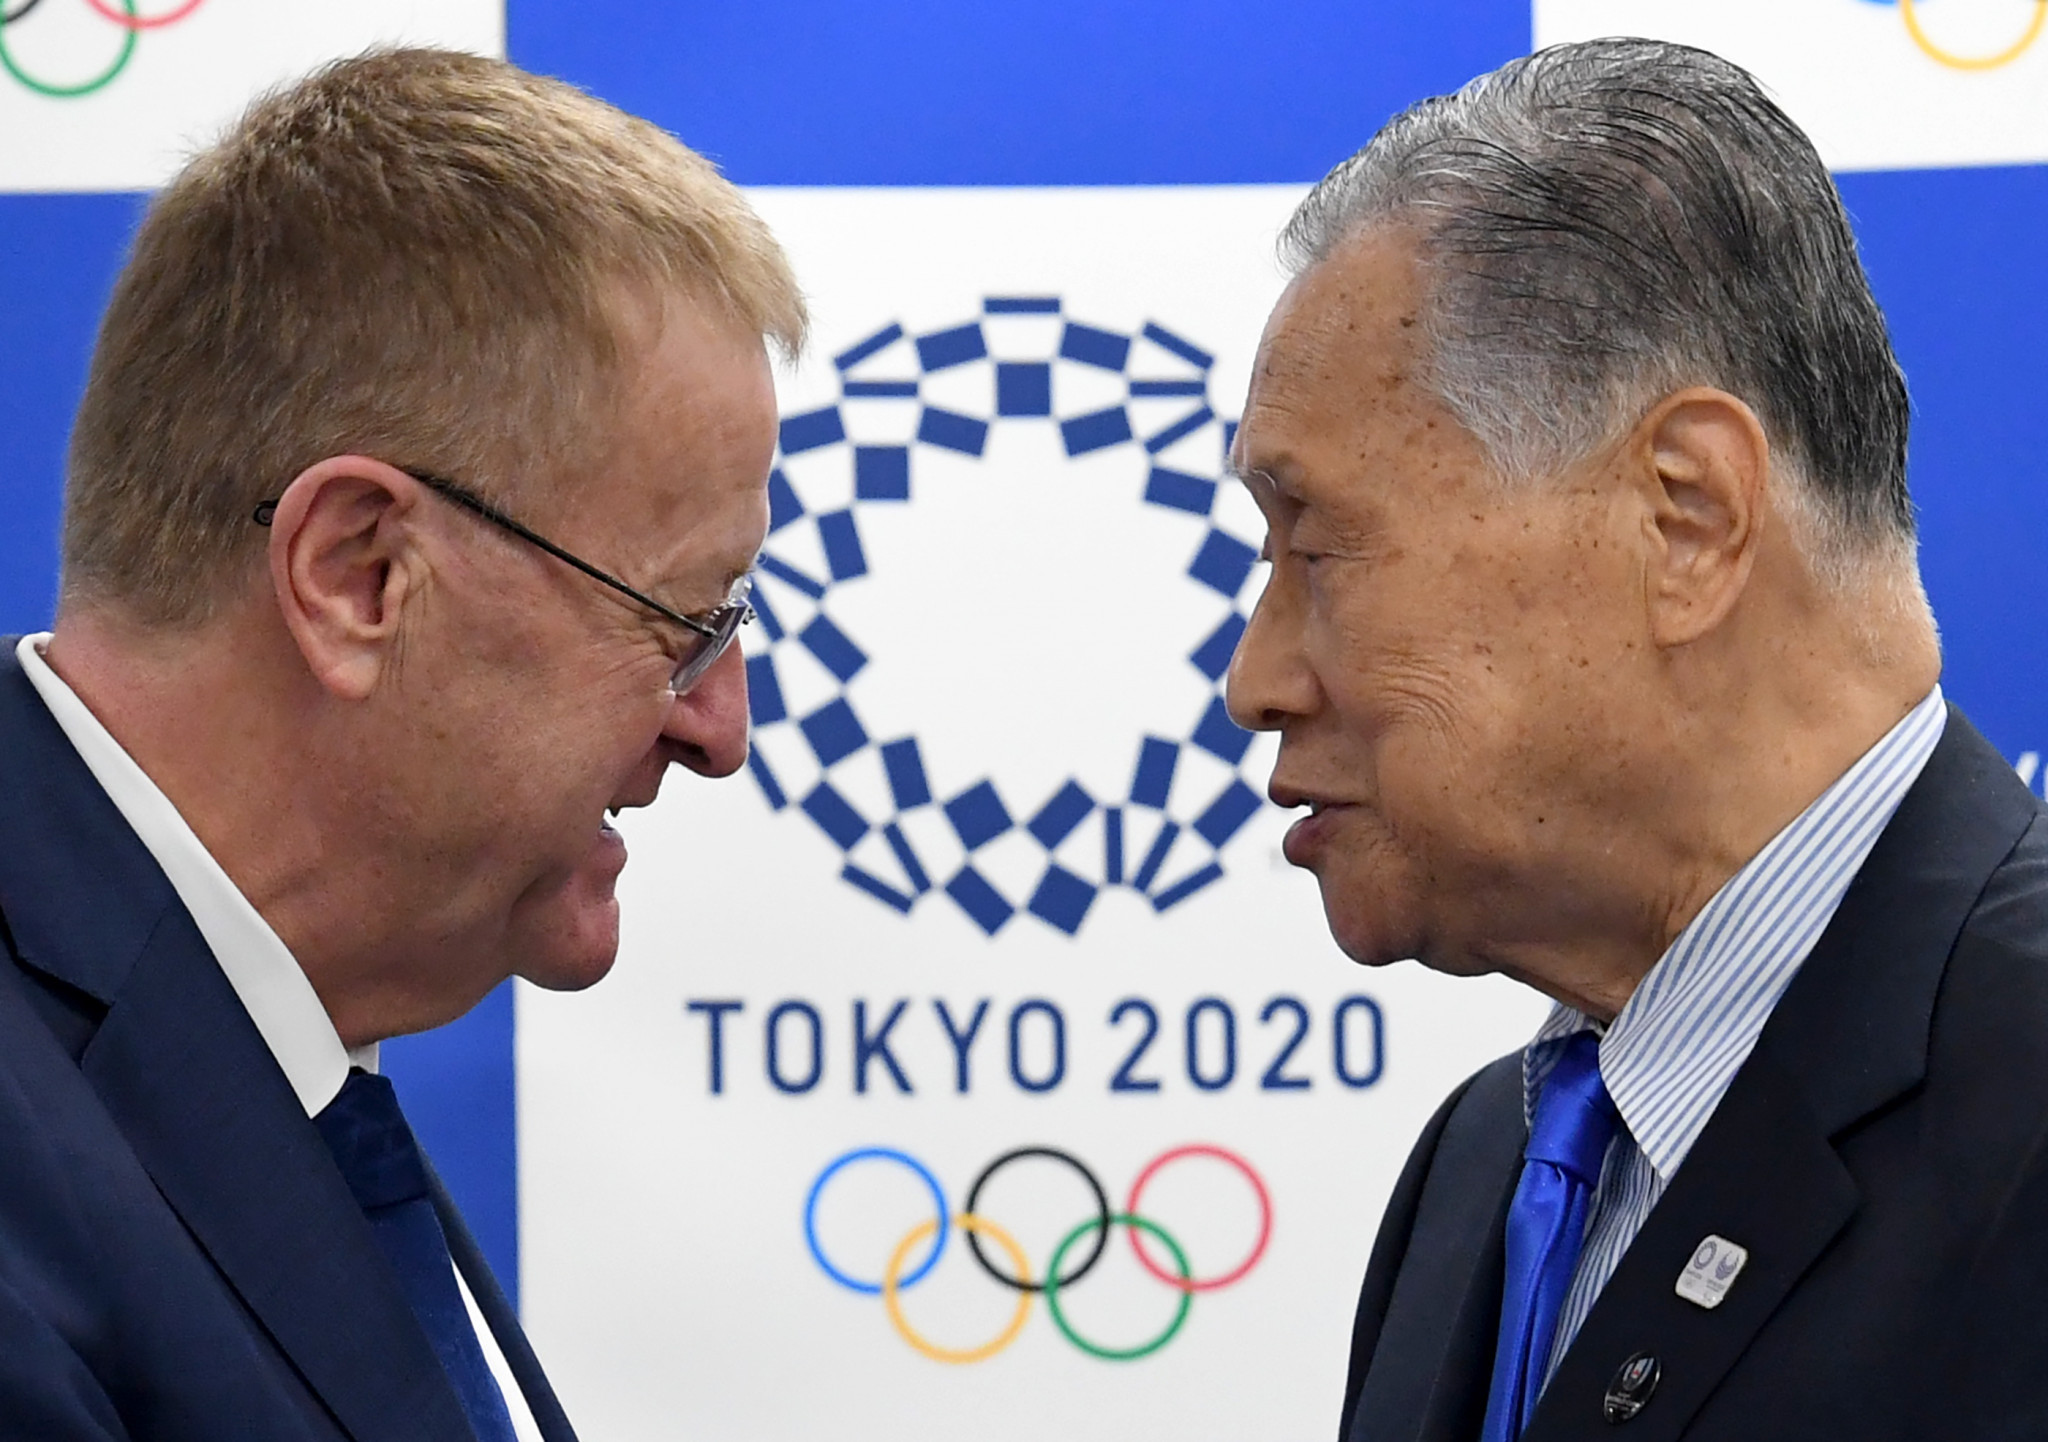 Tokyo 2020 President Yoshirō Mori, right, hopes to learn from Pyeongchang 2018 when a delegation visits next year's Winter Olympics ©Getty Images